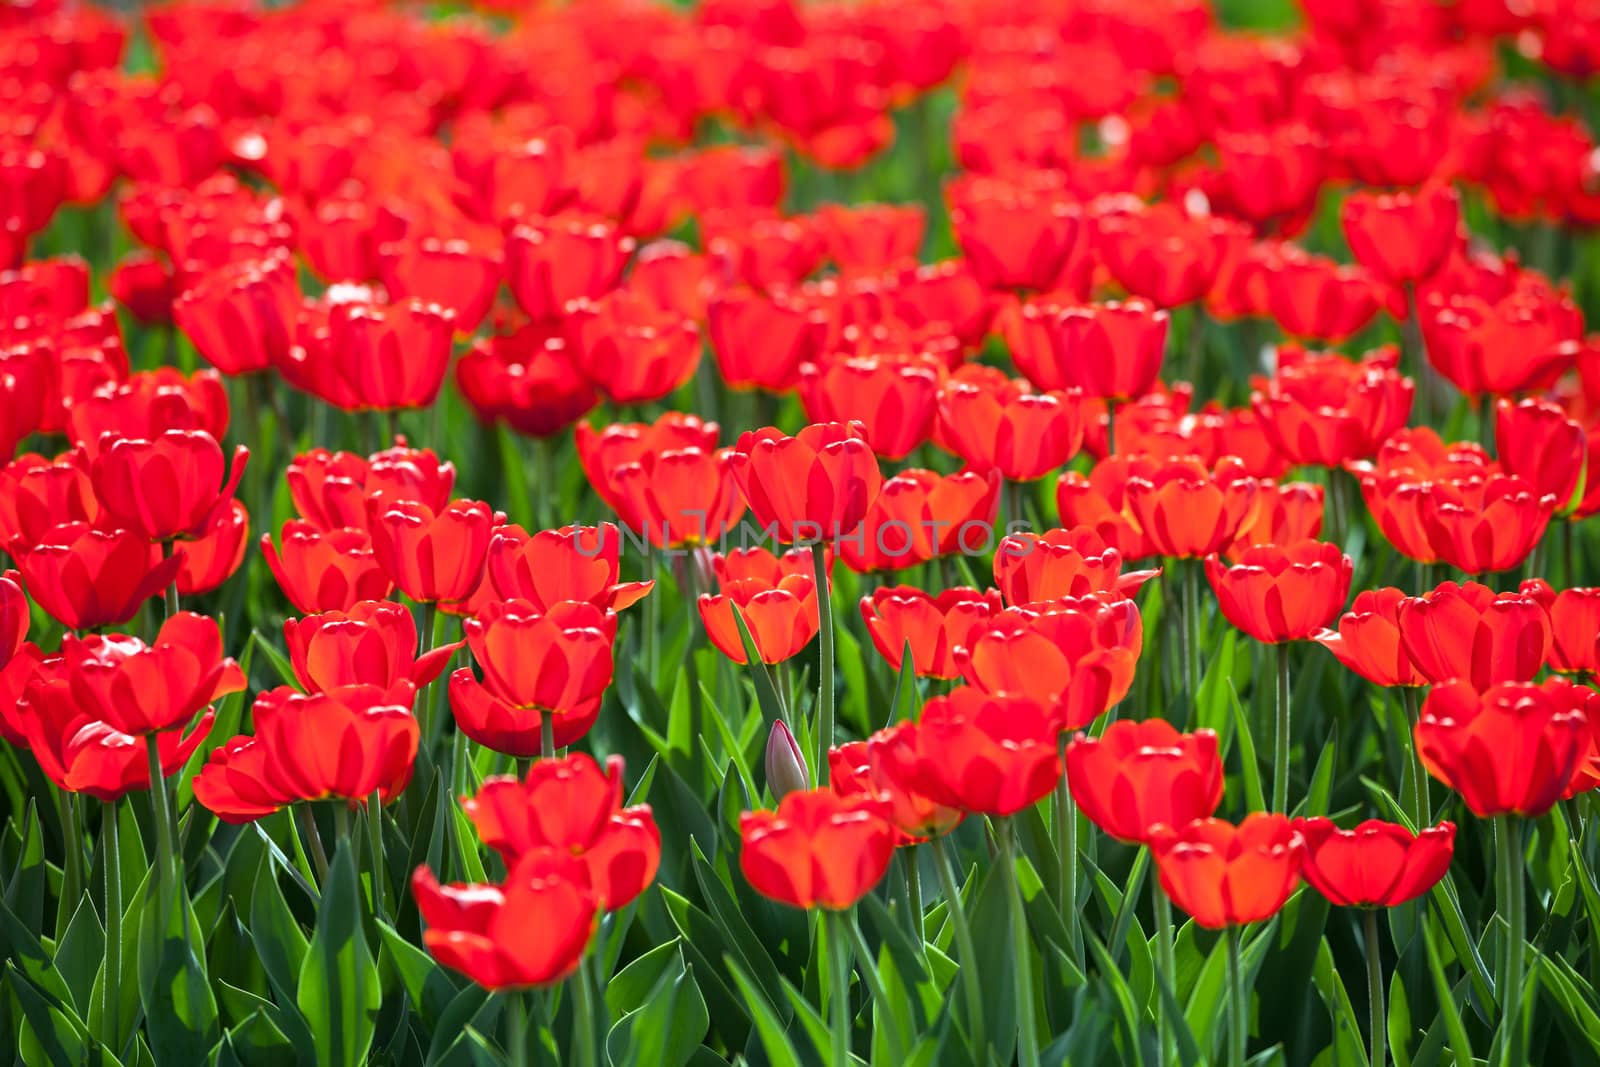 Green spring nature - red tulip flowers field in bloom